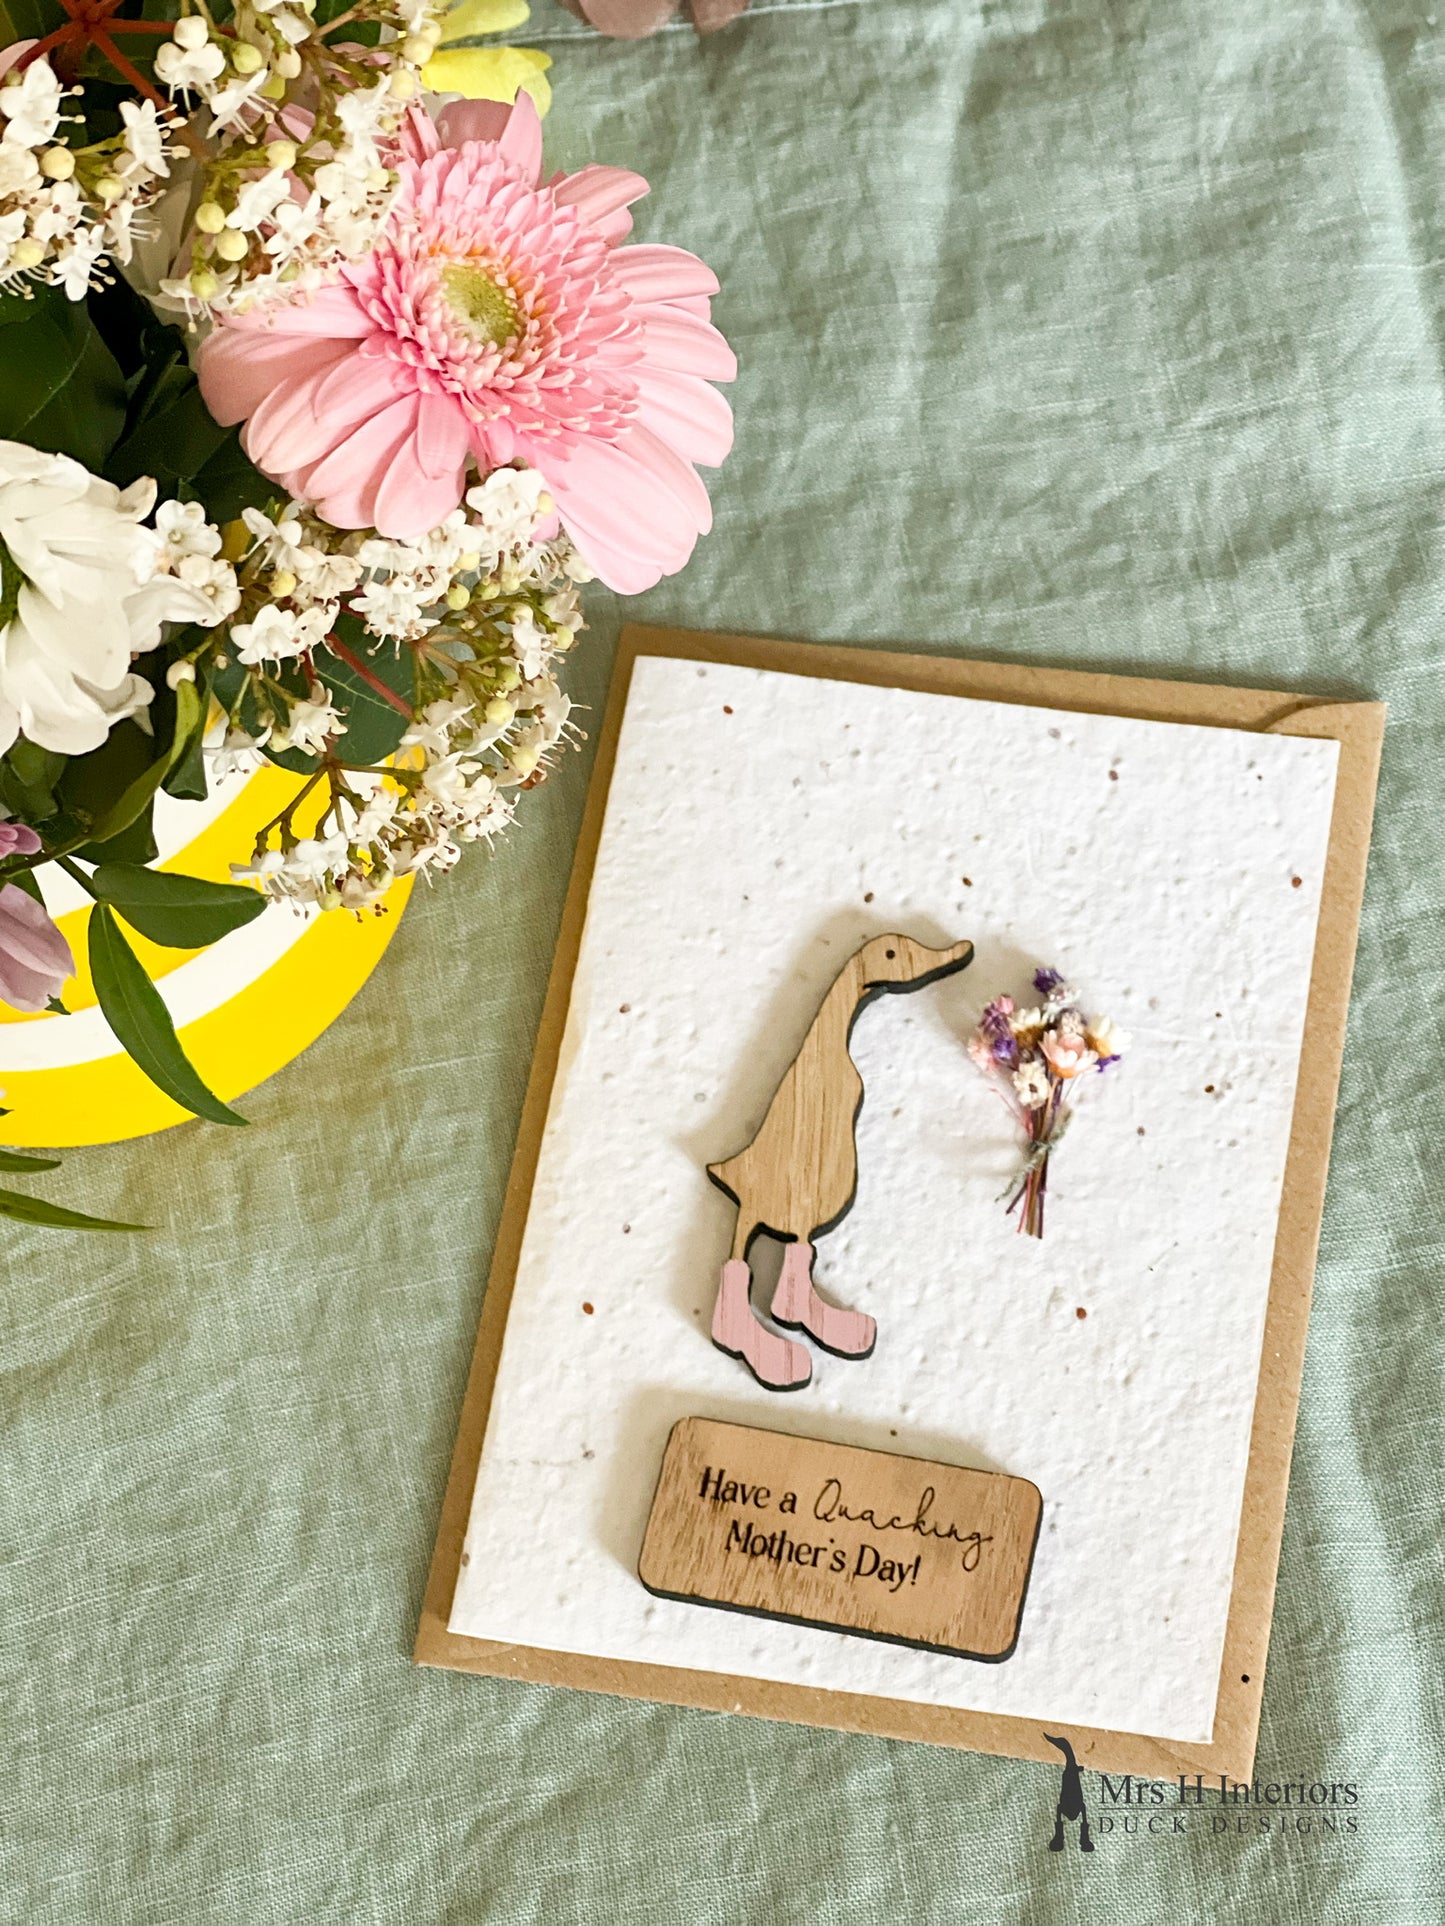 Have a Quacking Mother's Day - Duck with Flowers - Mother's Day Card - Decorated Wooden Duck in Boots by Mrs H the Duck Lady